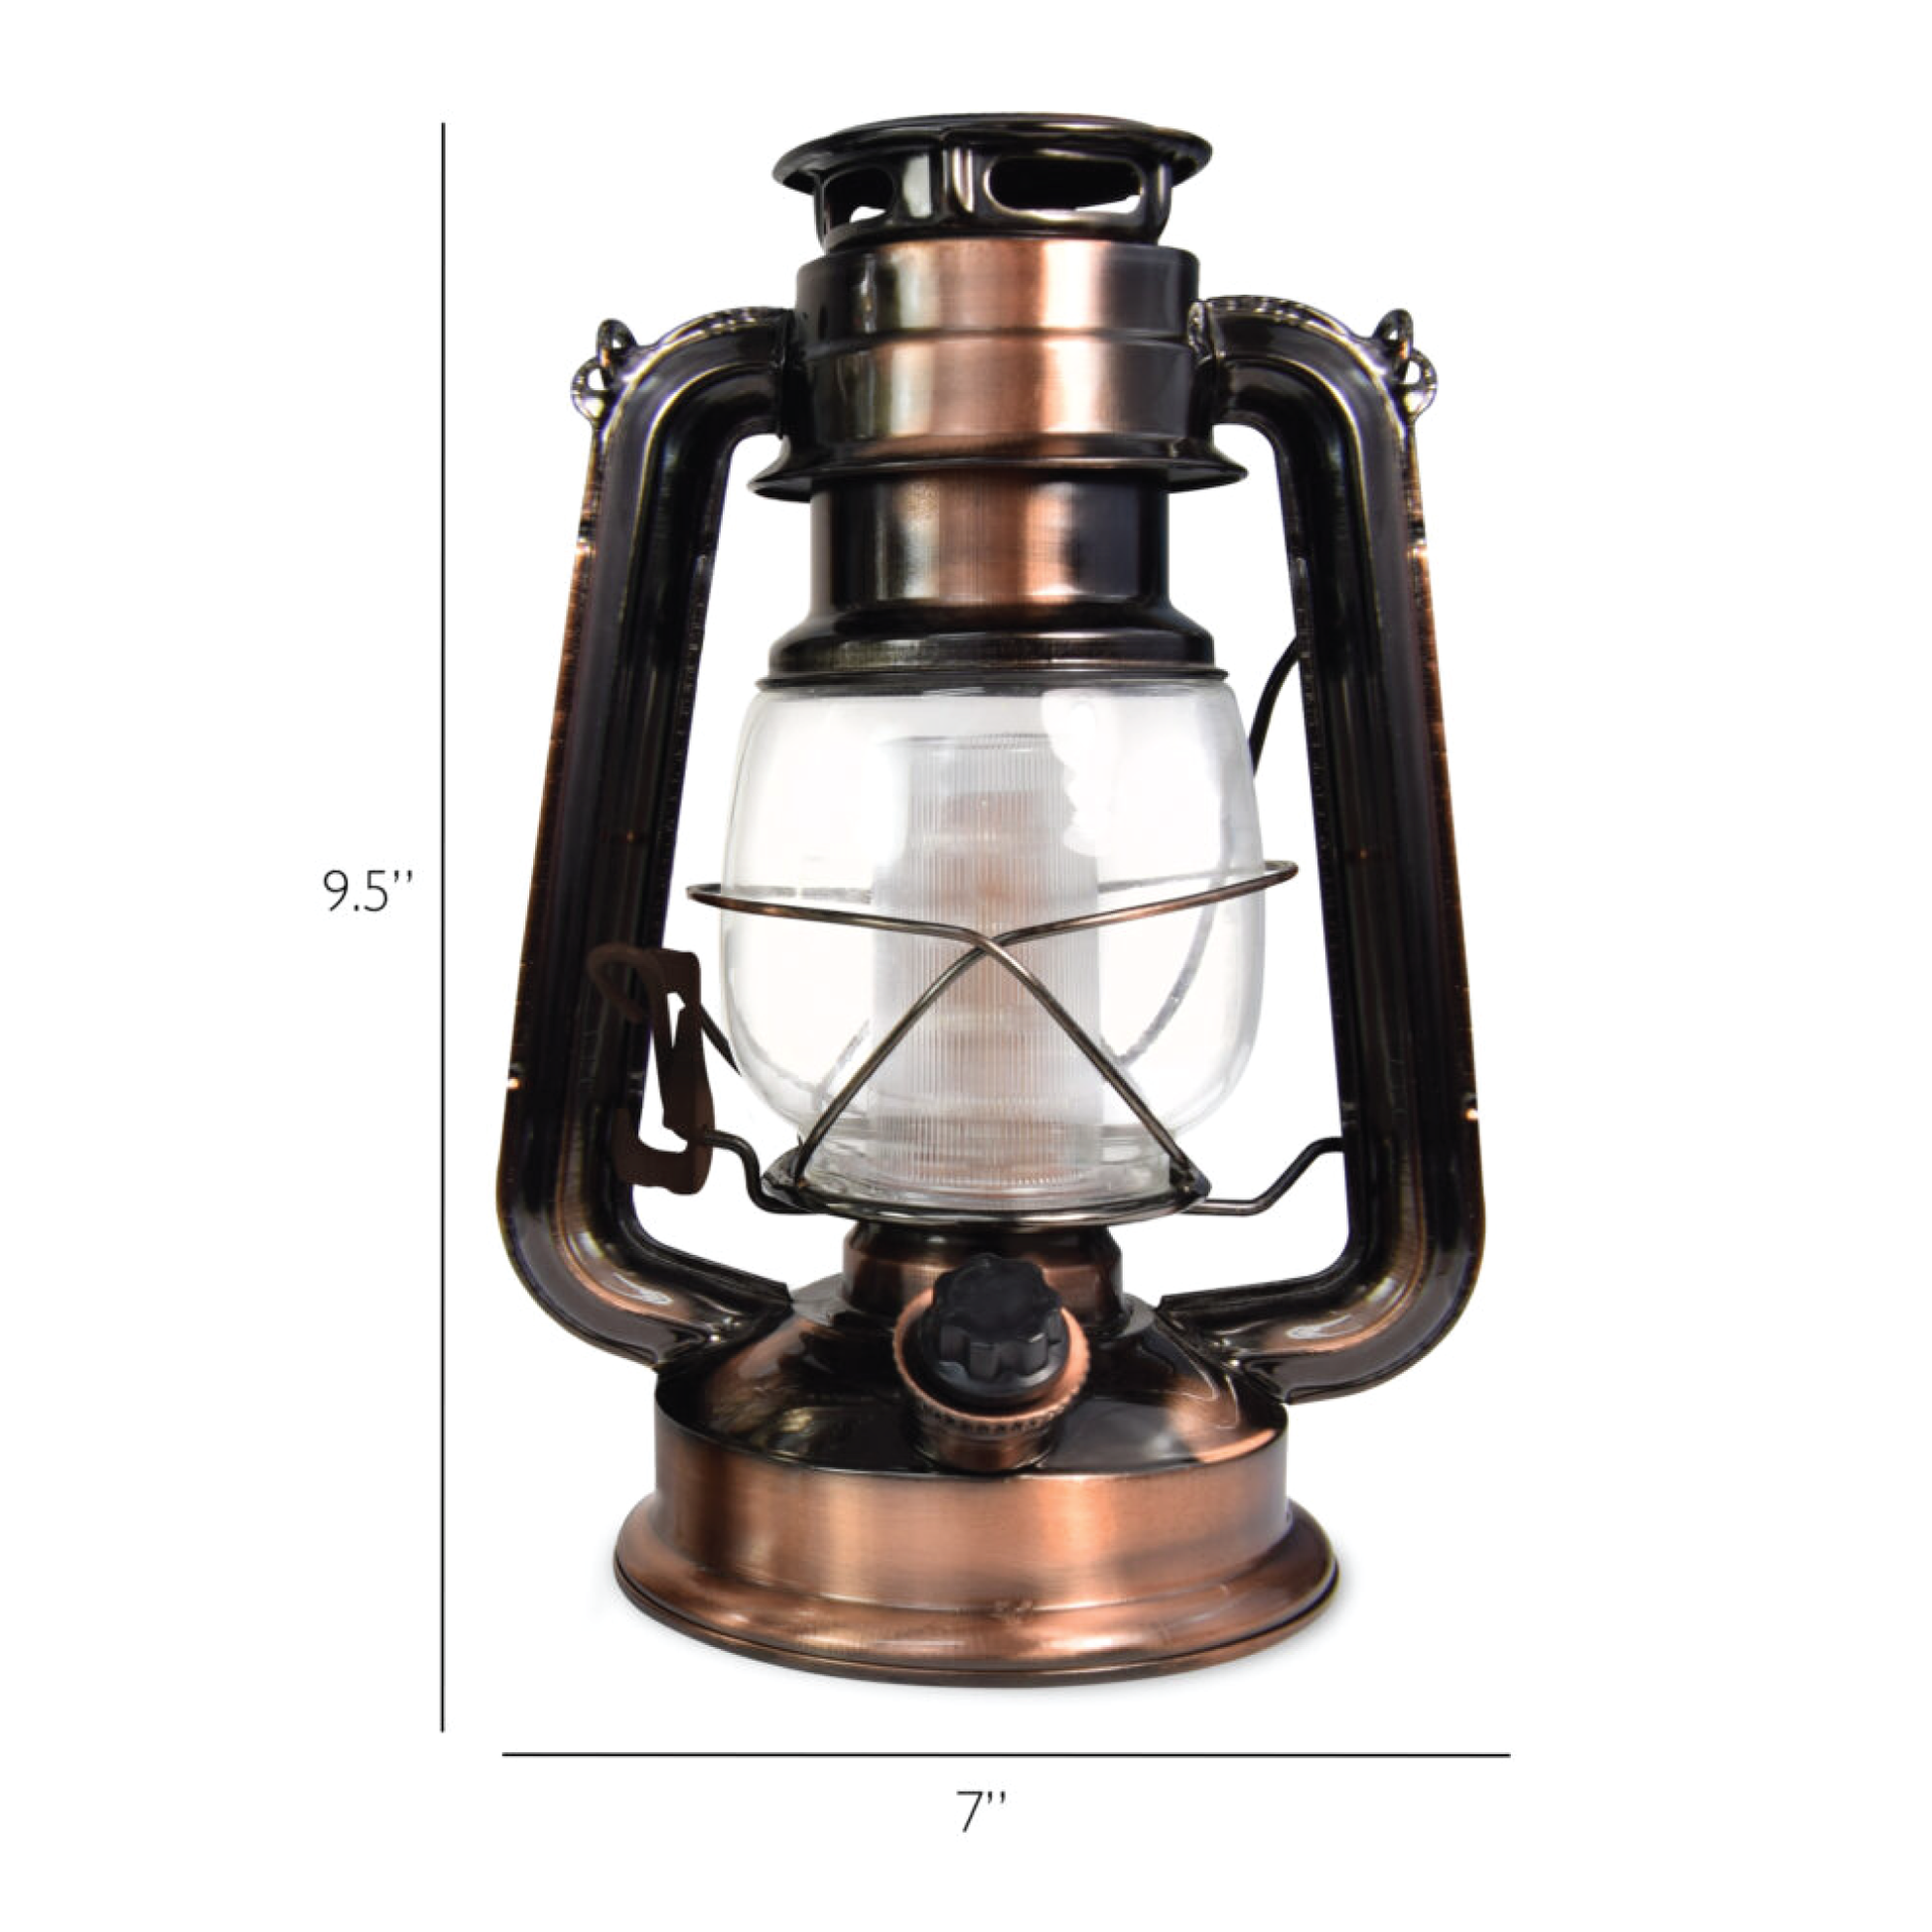 North Point® Vintage LED Lantern in copper, standing at 9.5" tall and measuring 7" wide.